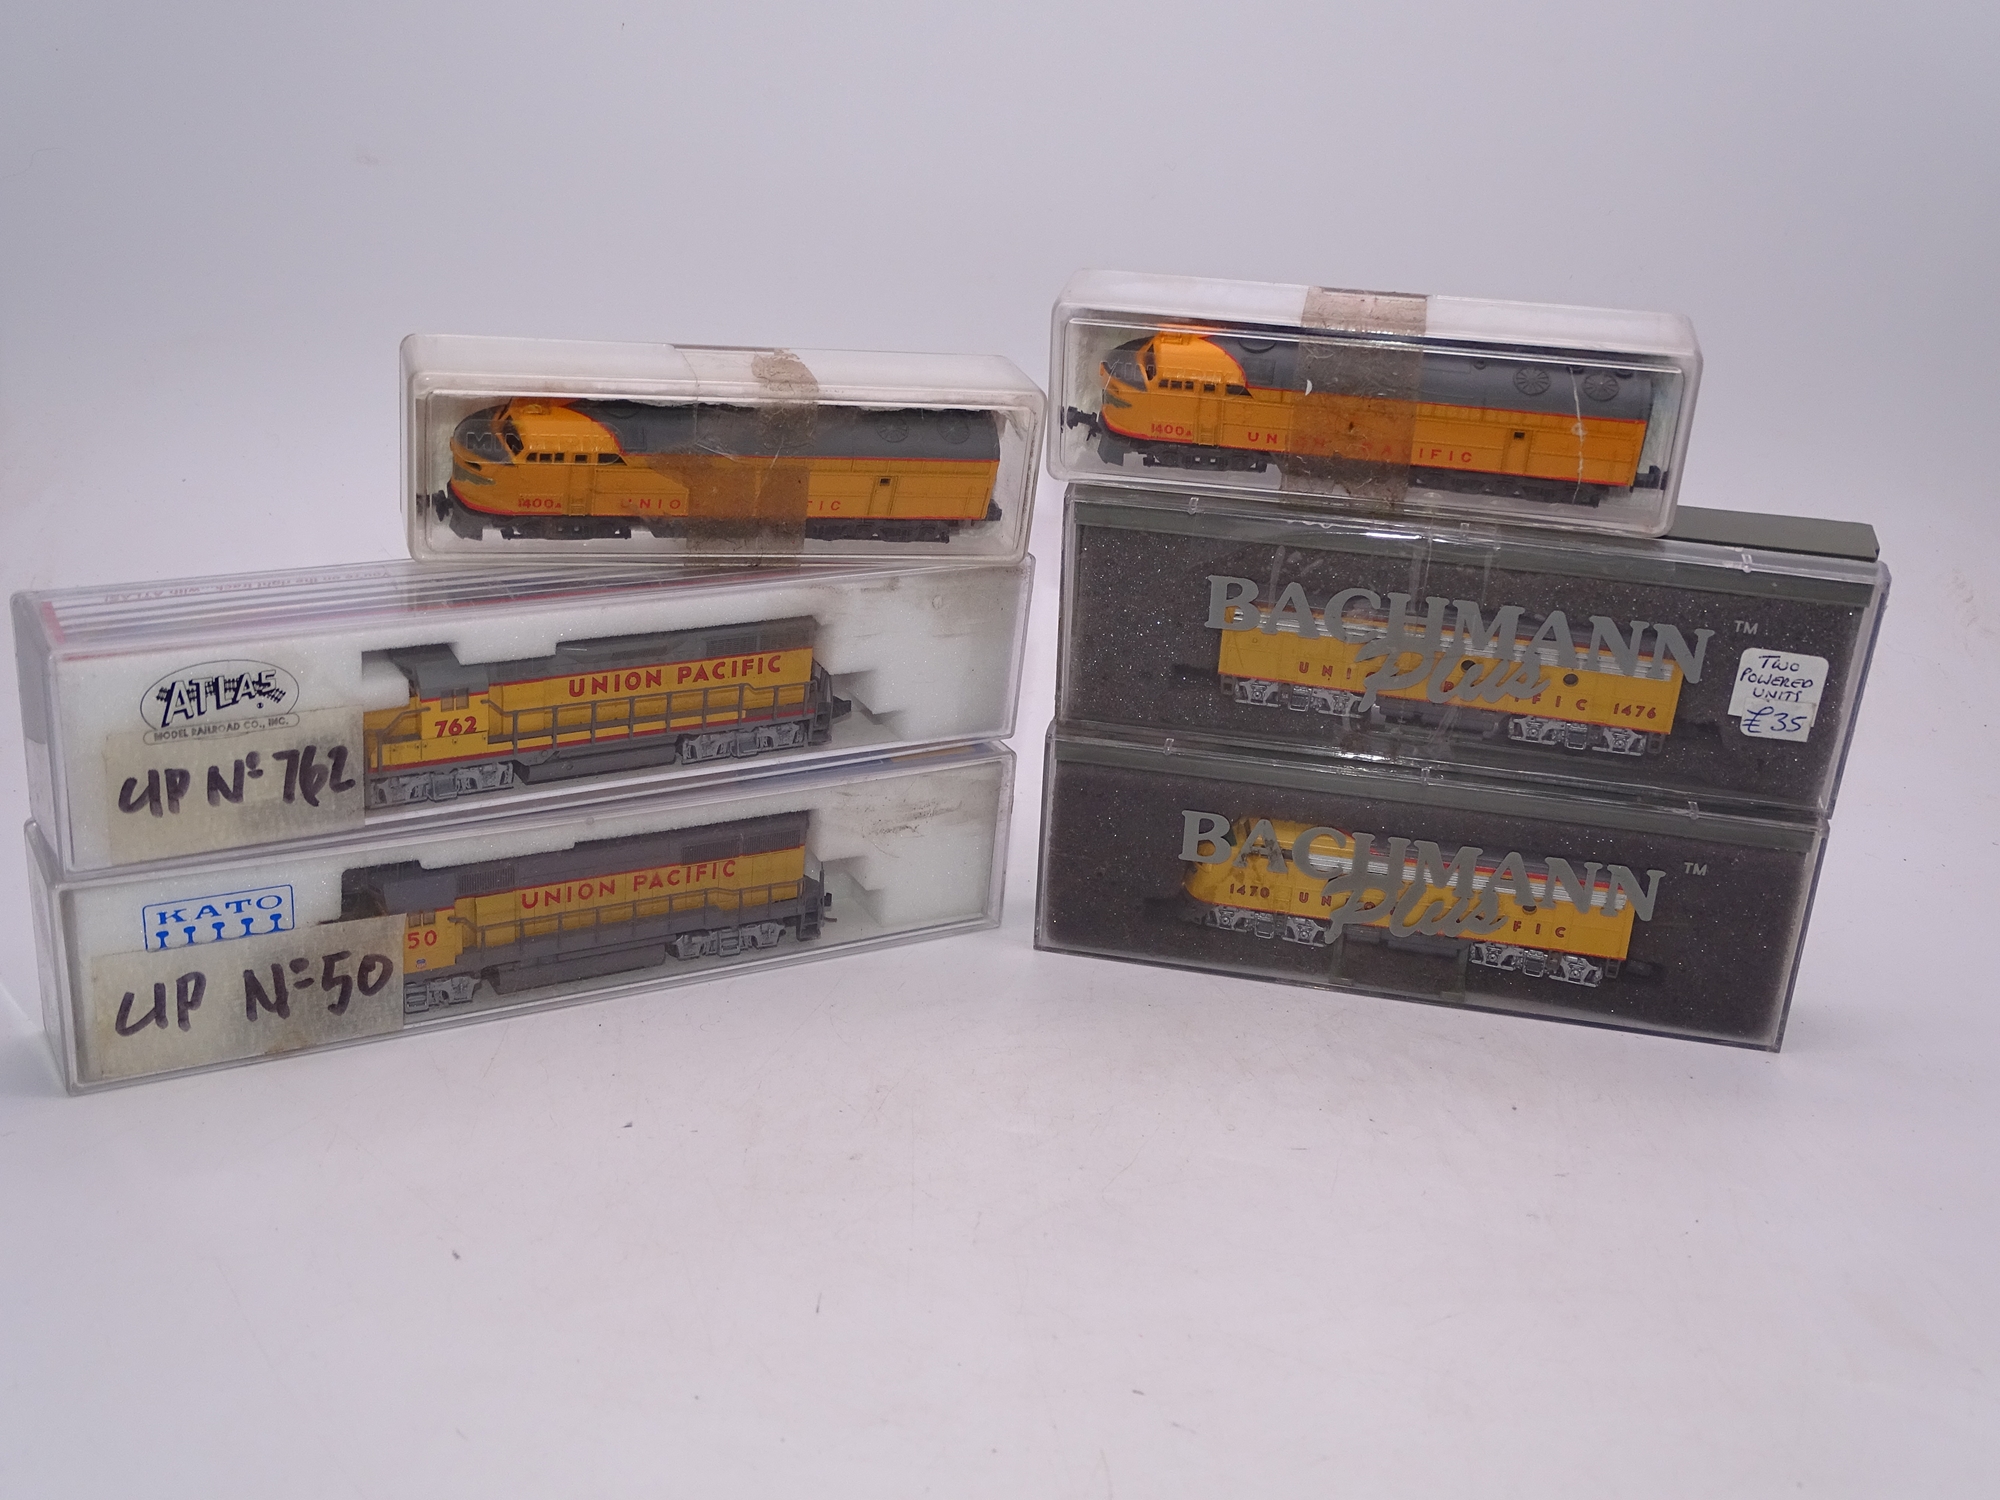 N Gauge: American Outline: A group of Diesel locomotives by BACHMANN, KATO, ATLAS and others - All